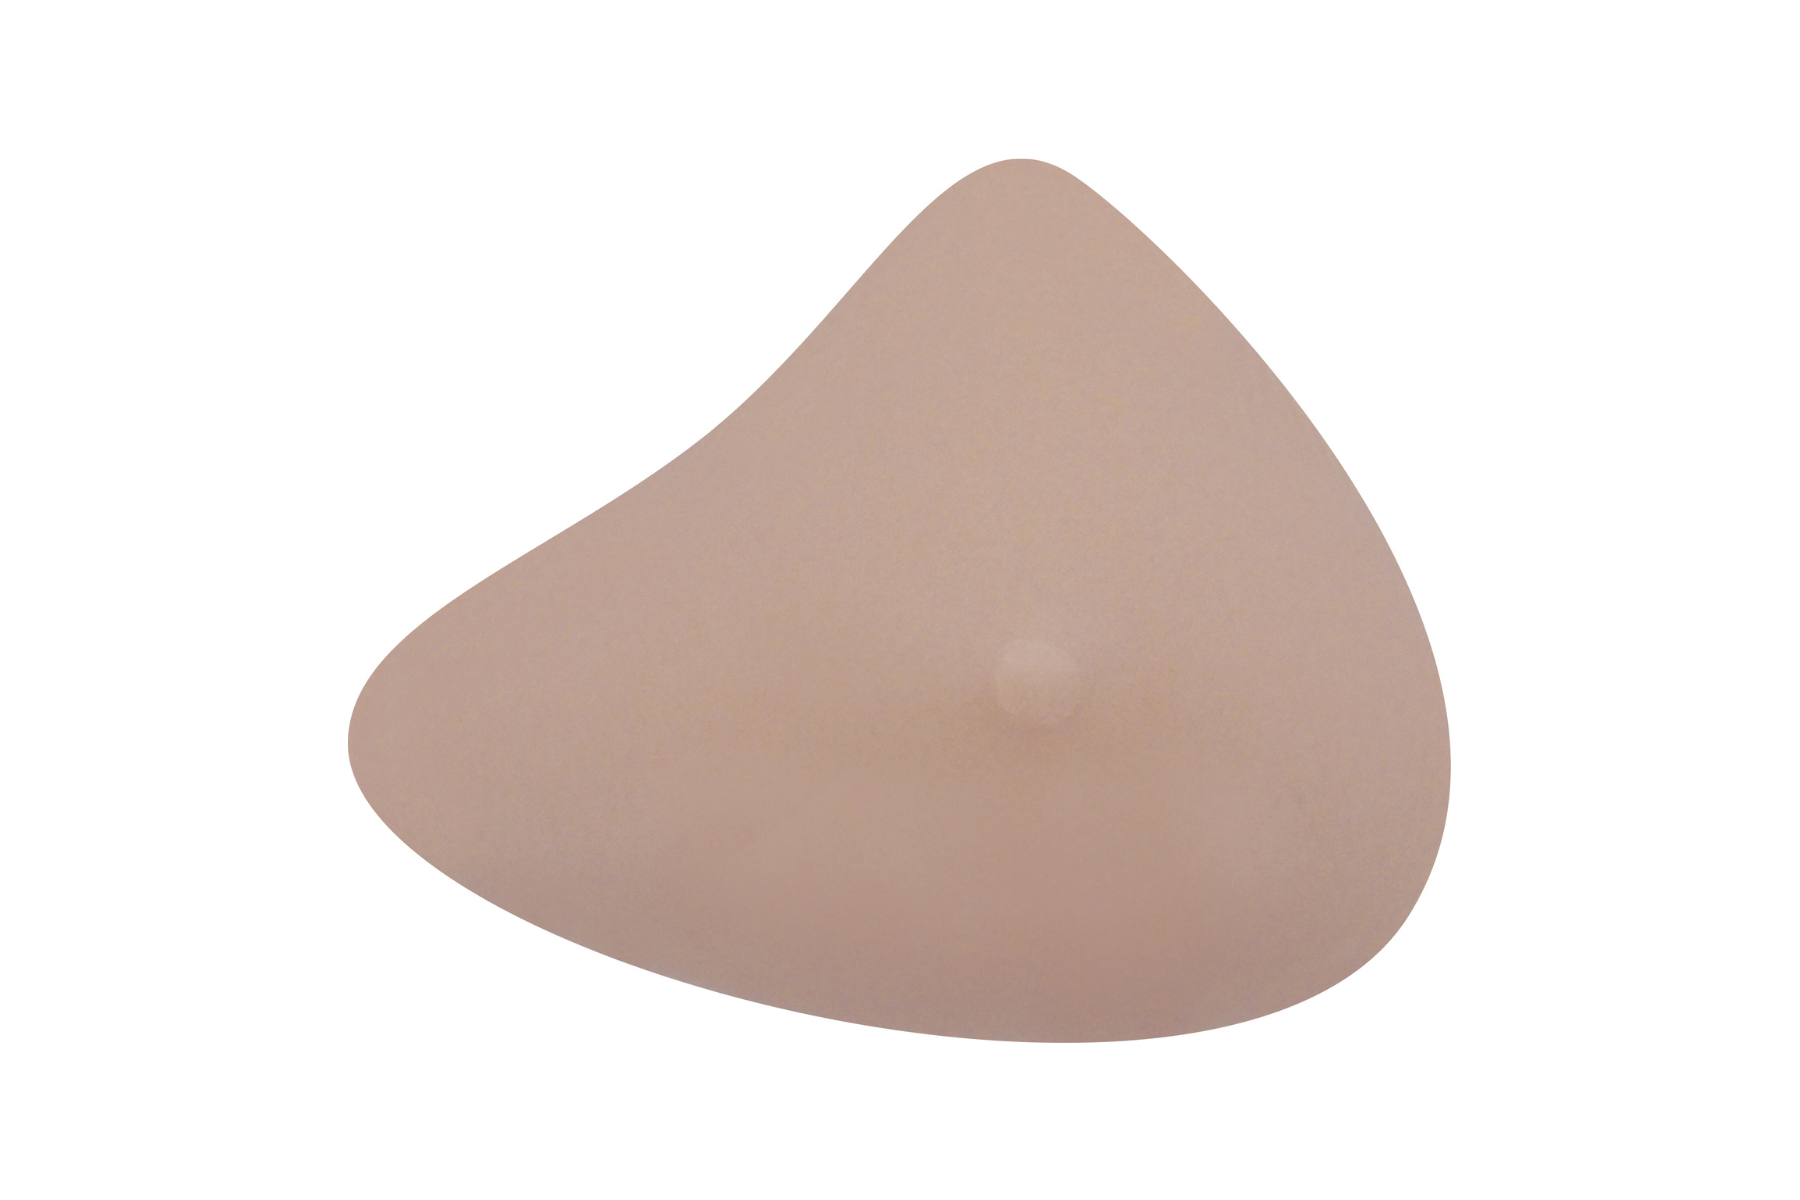 Concave Breast Prosthesis - Silicone Breast Forms Macao